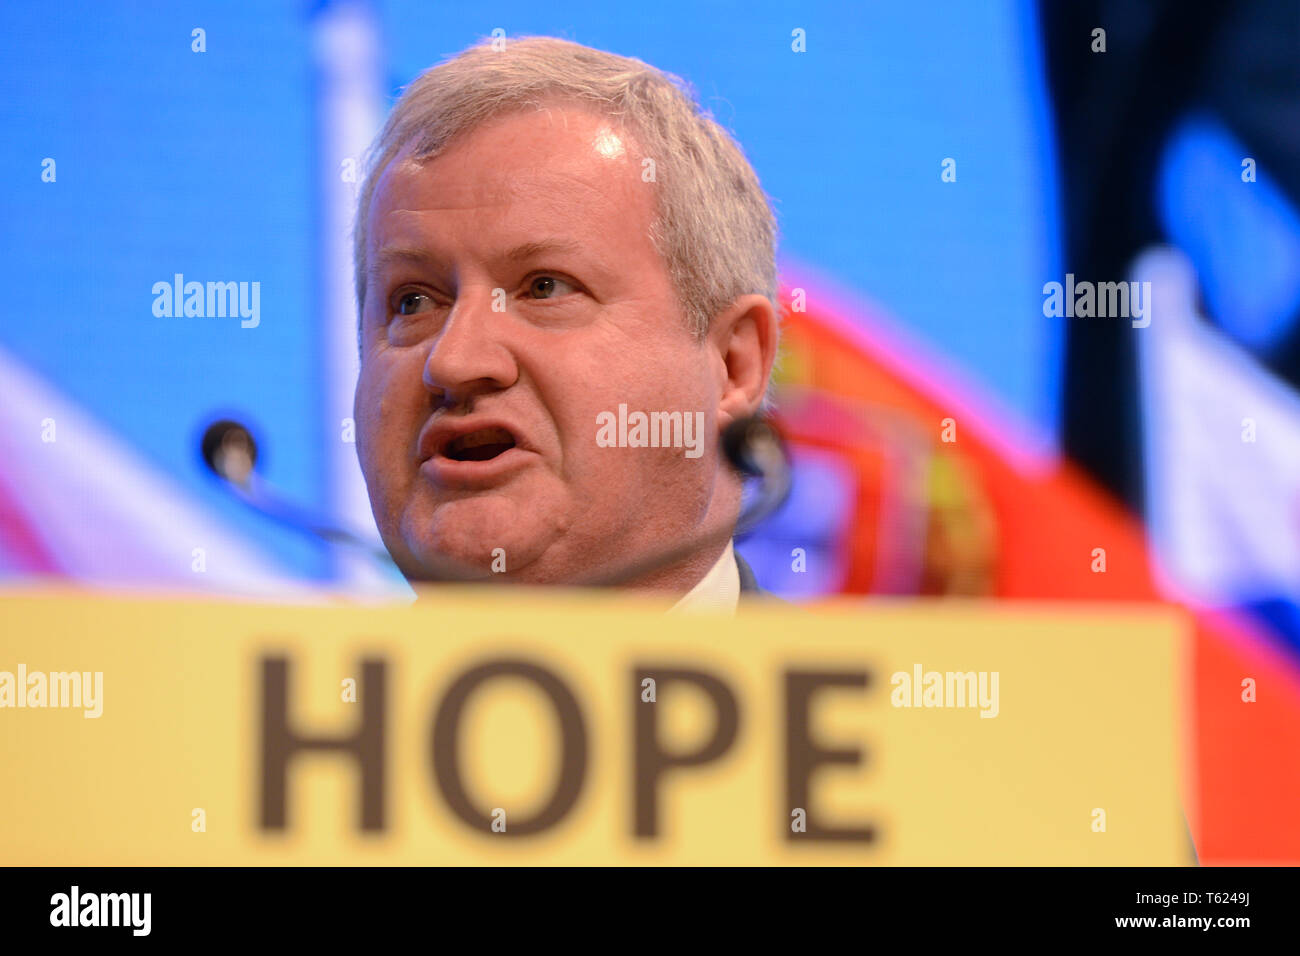 Edinburgh, Scotland, United Kingdom, 27, April, 2019. SNP Westminster leader Ian Blackford addresses the Scottish National Party's Spring Conference in the Edinburgh International Conference Centre. © Ken Jack / Alamy Live News Stock Photo